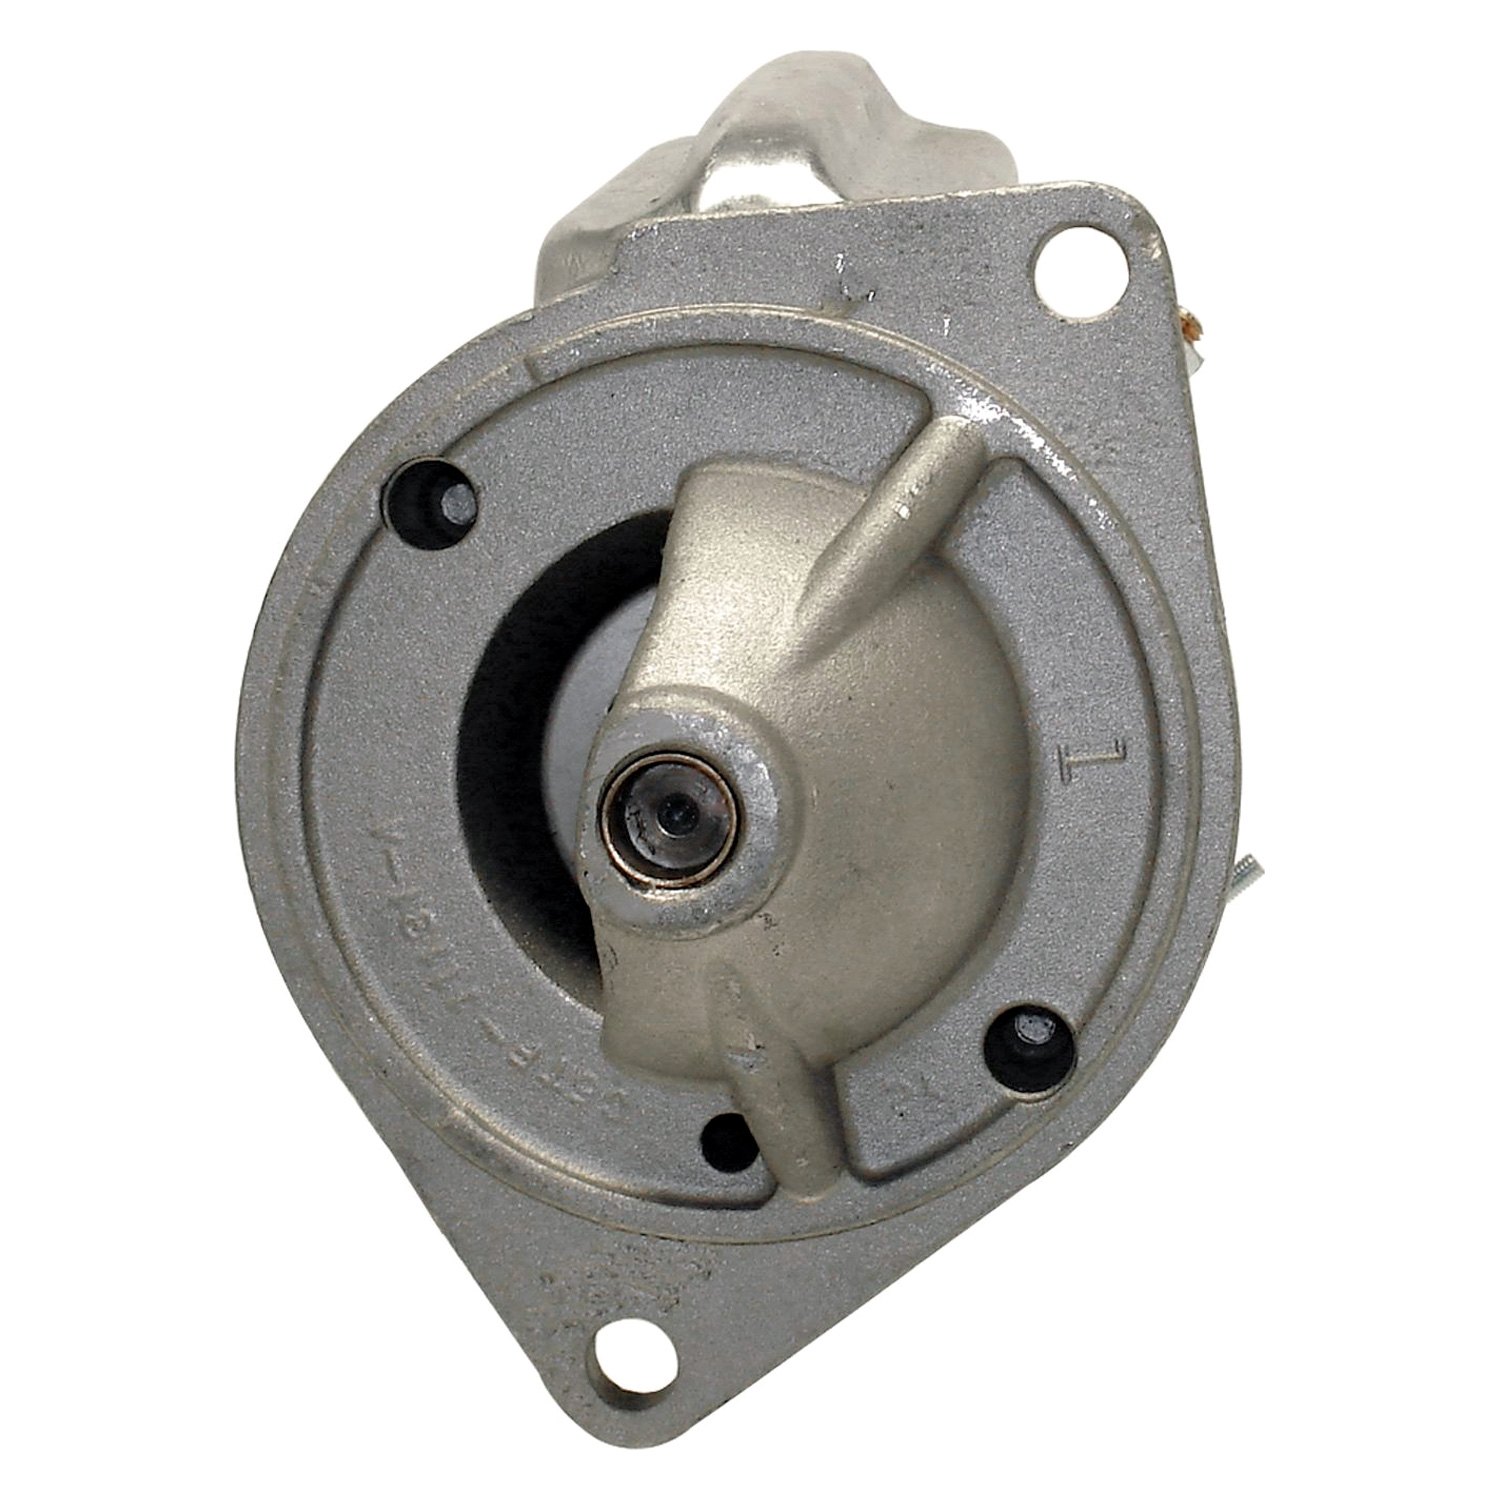 Remanufactured ACDelco 336-1008 Professional Starter 